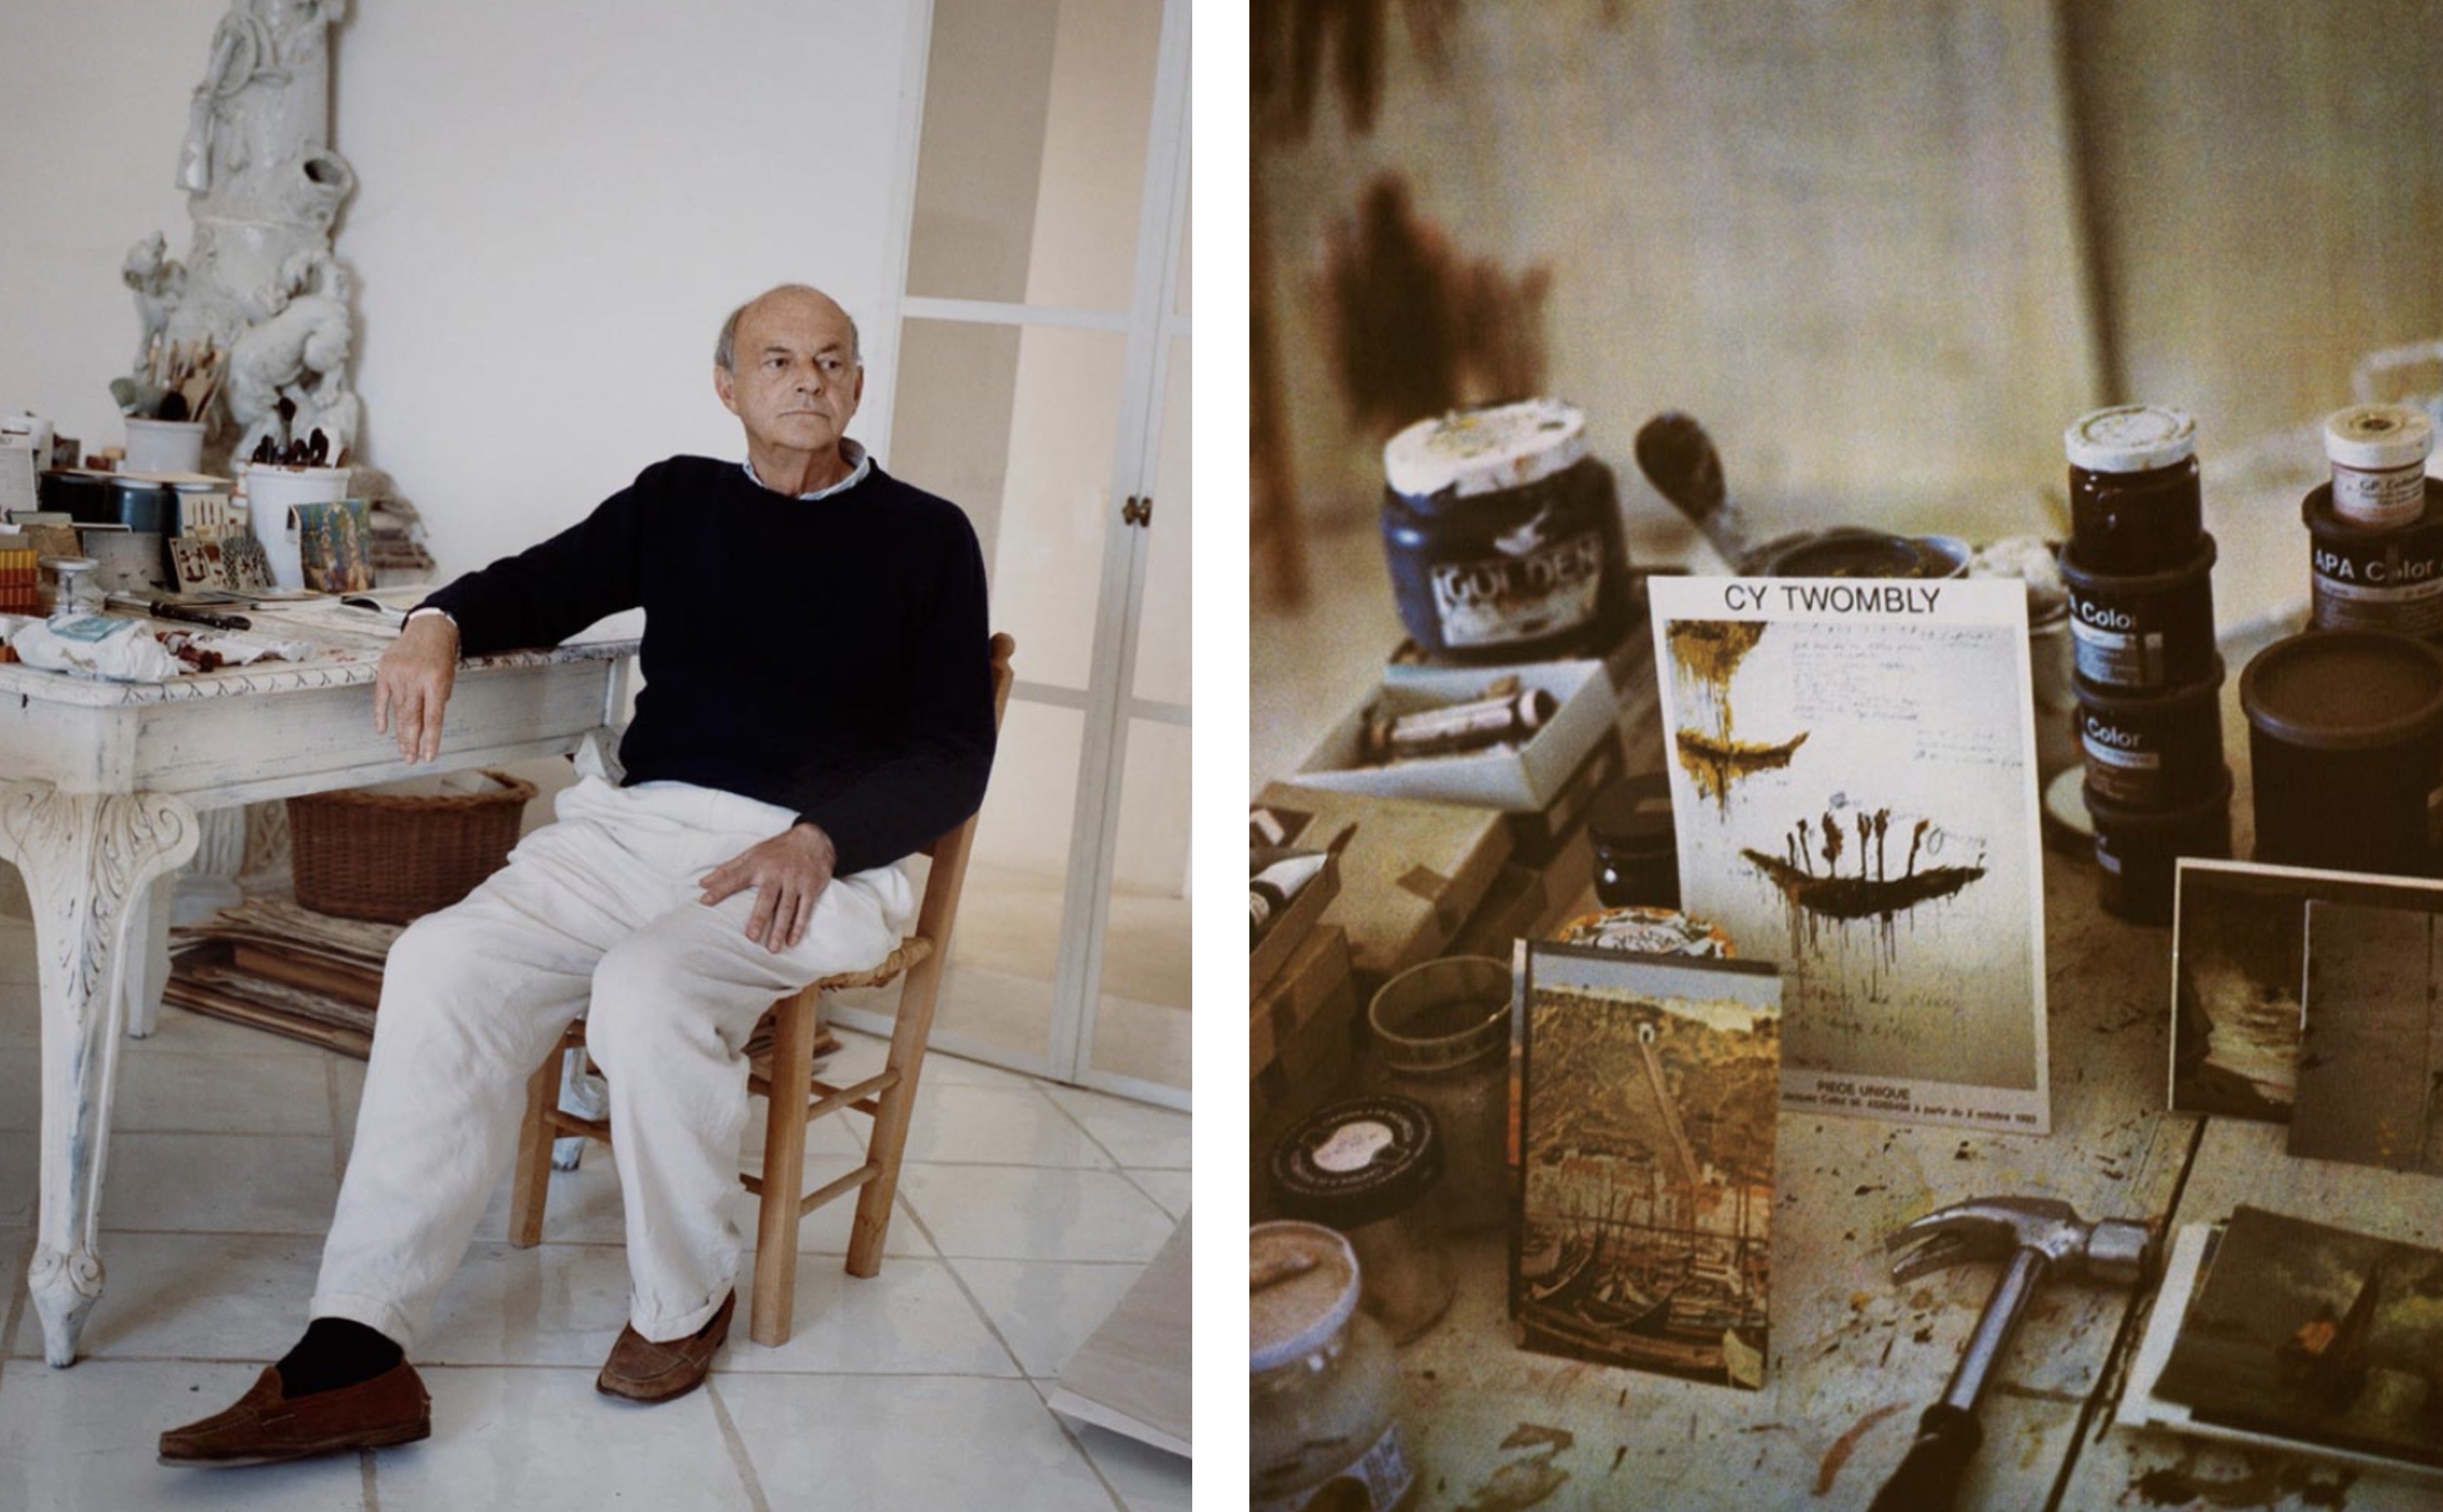 Artist Ateliers: Cy Twombly     